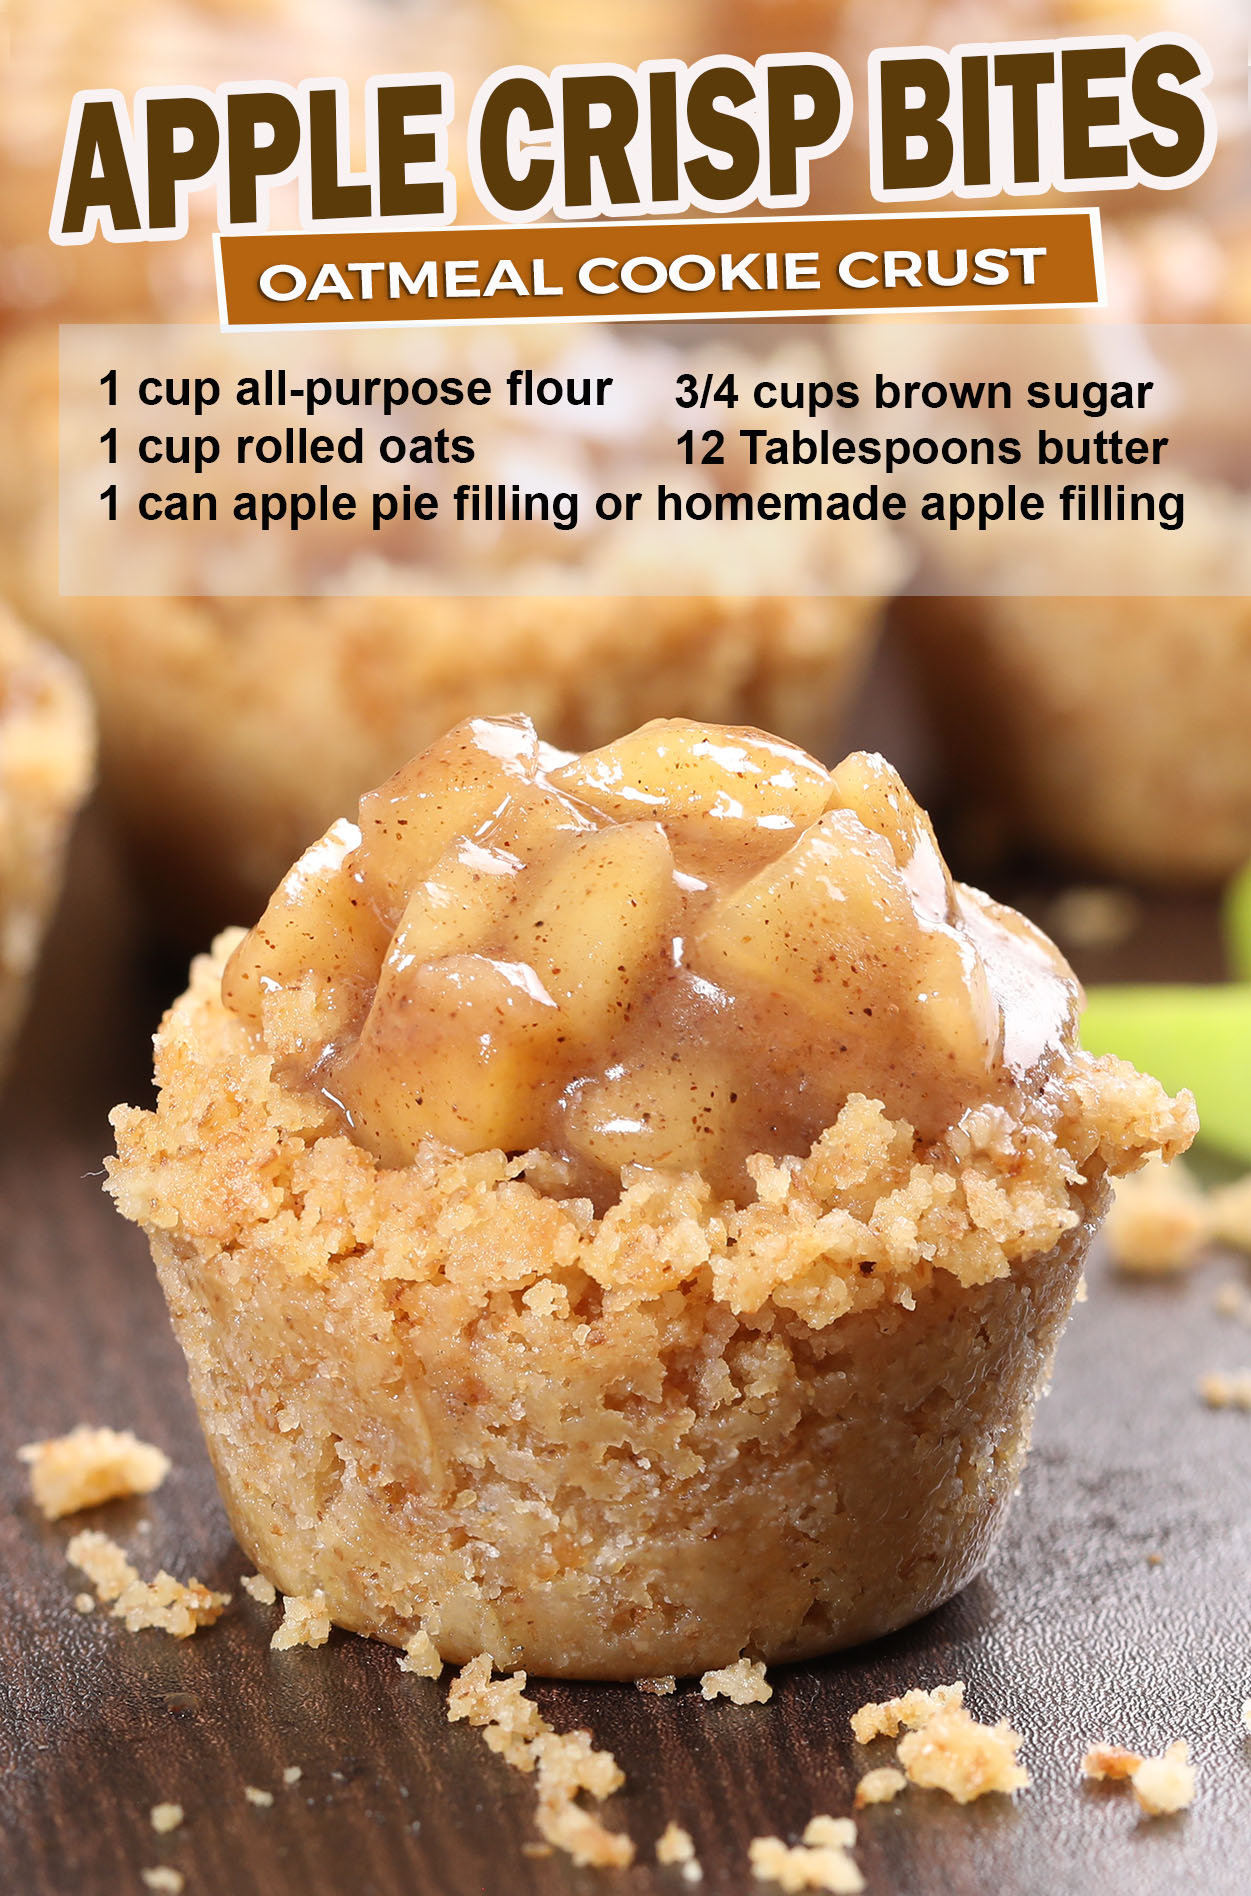 Apple Crisp Bites – A little bite of heaven! Crispy baked oatmeal cookie crust on the outside, soft apple pie on the inside! You’ll be enjoying this awesome dessert in about 30 minutes.